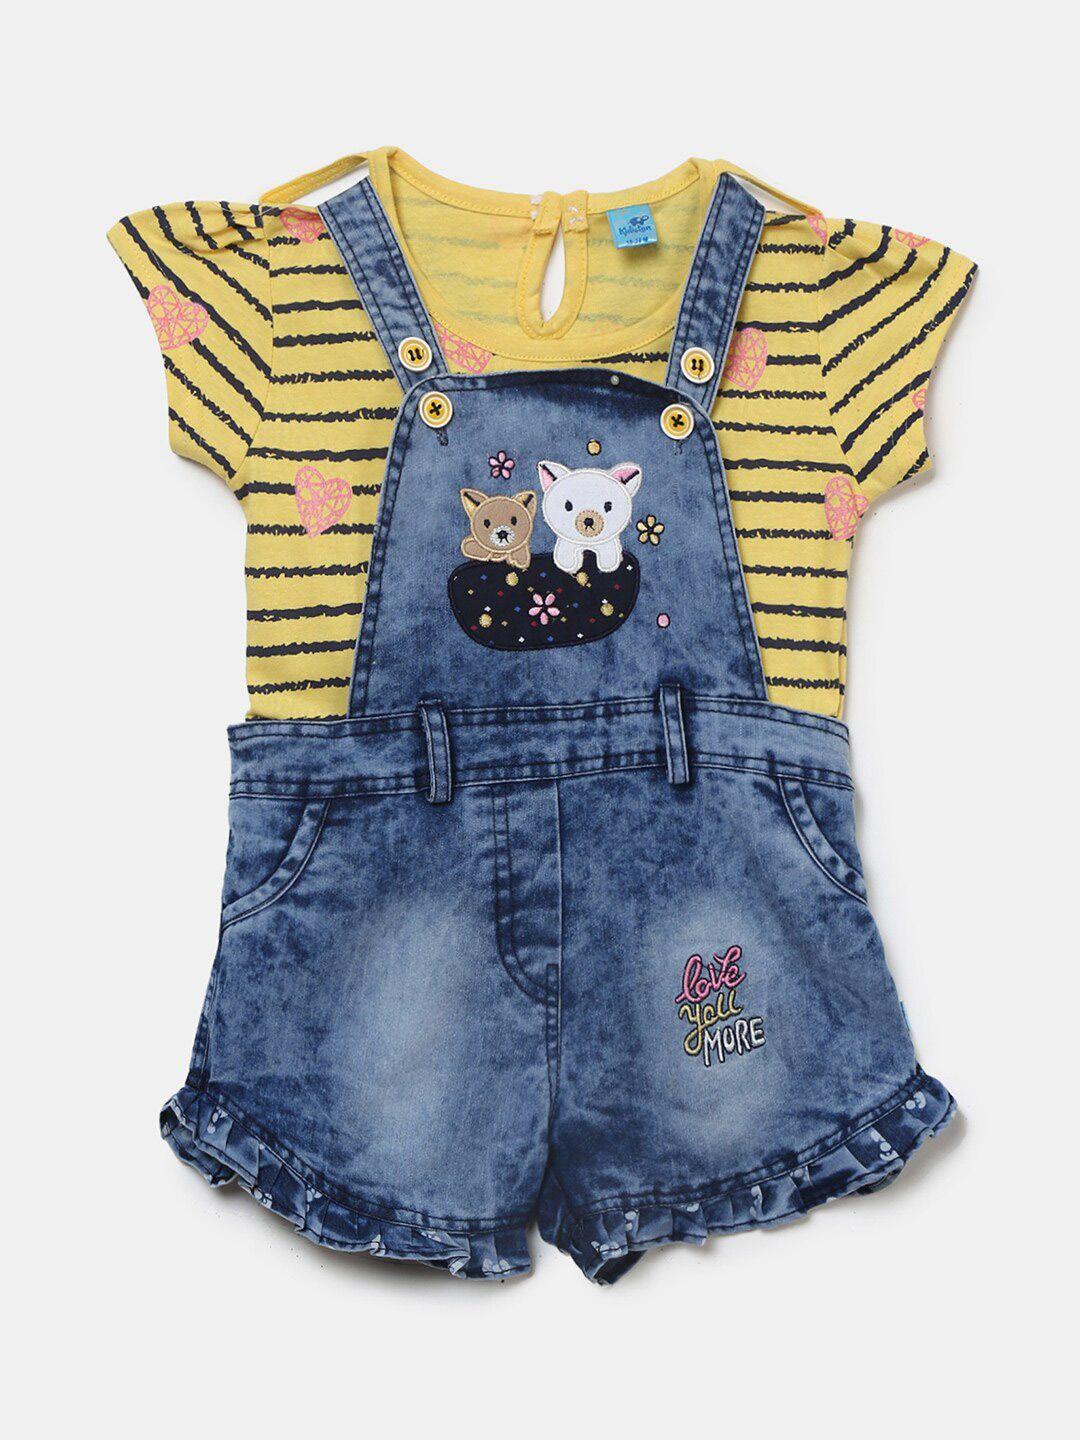 v-mart kids striped top with shorts